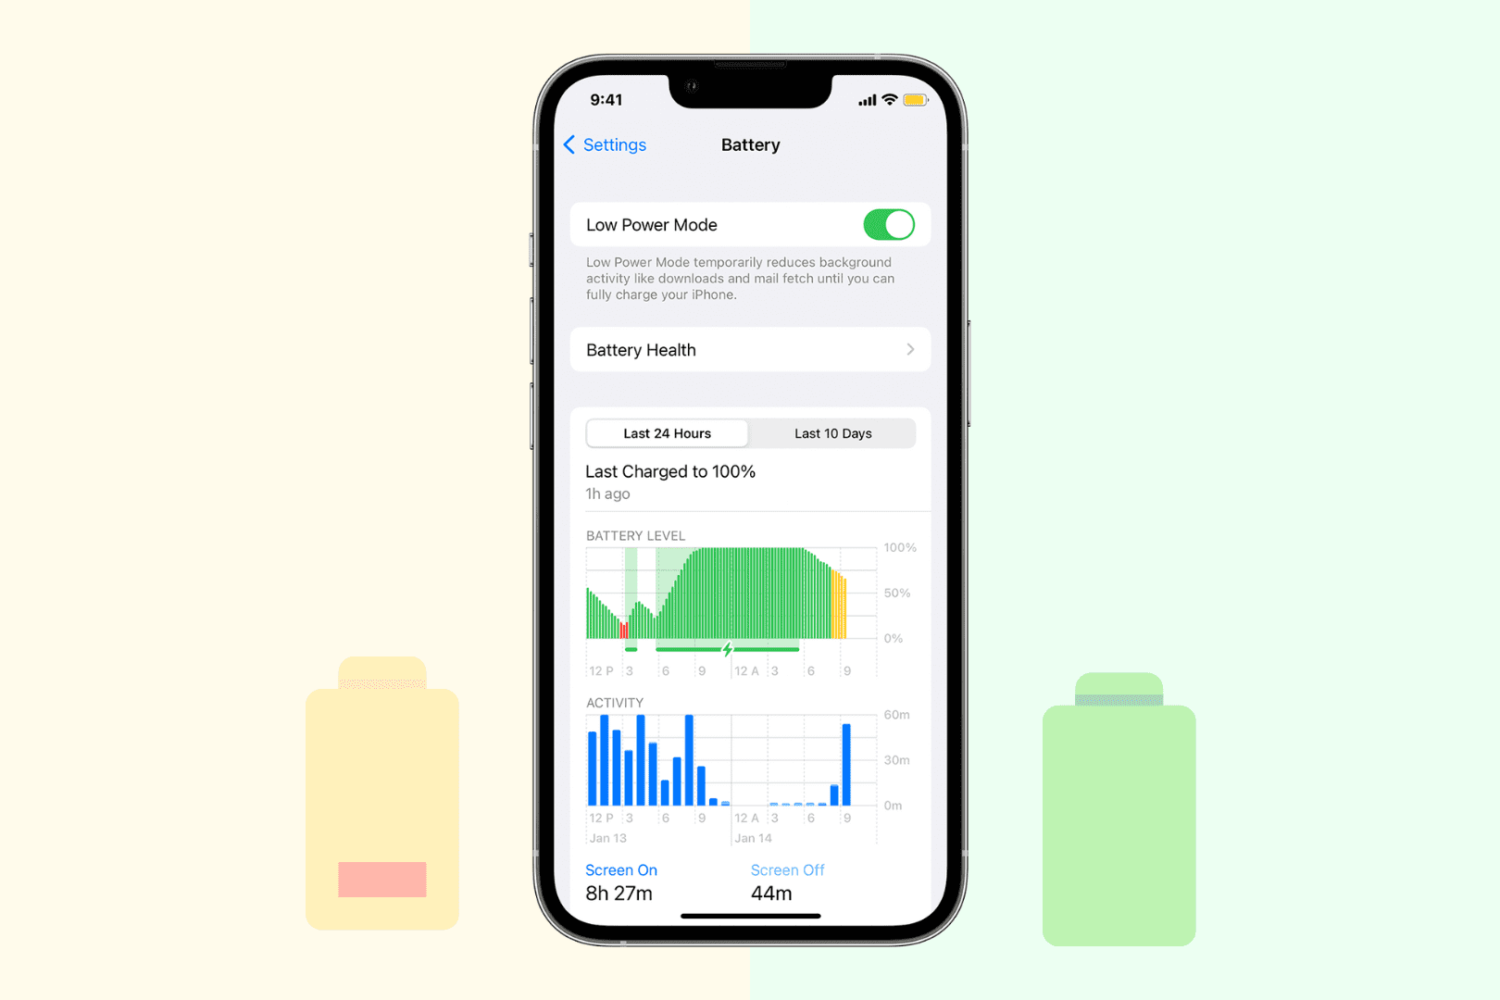 How to use Low Power Mode on iPhone